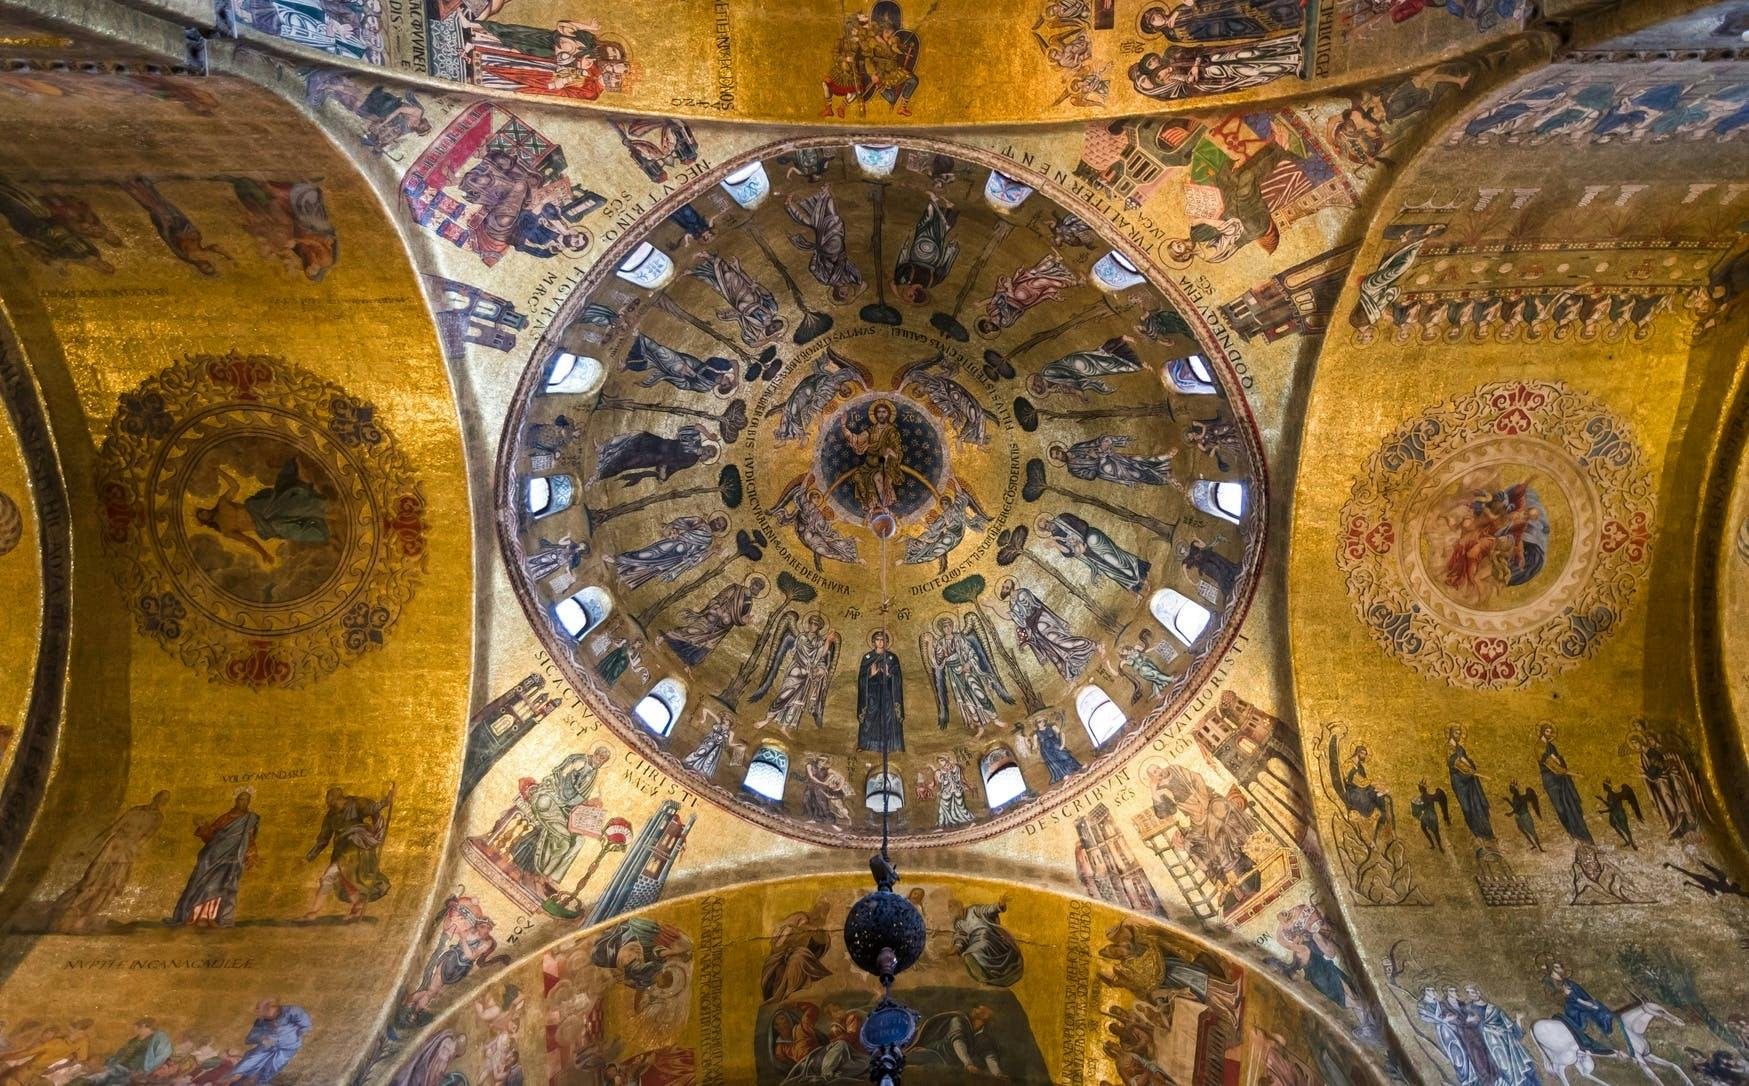 St. Mark's Basilica tickets with audio guide on your smartphone